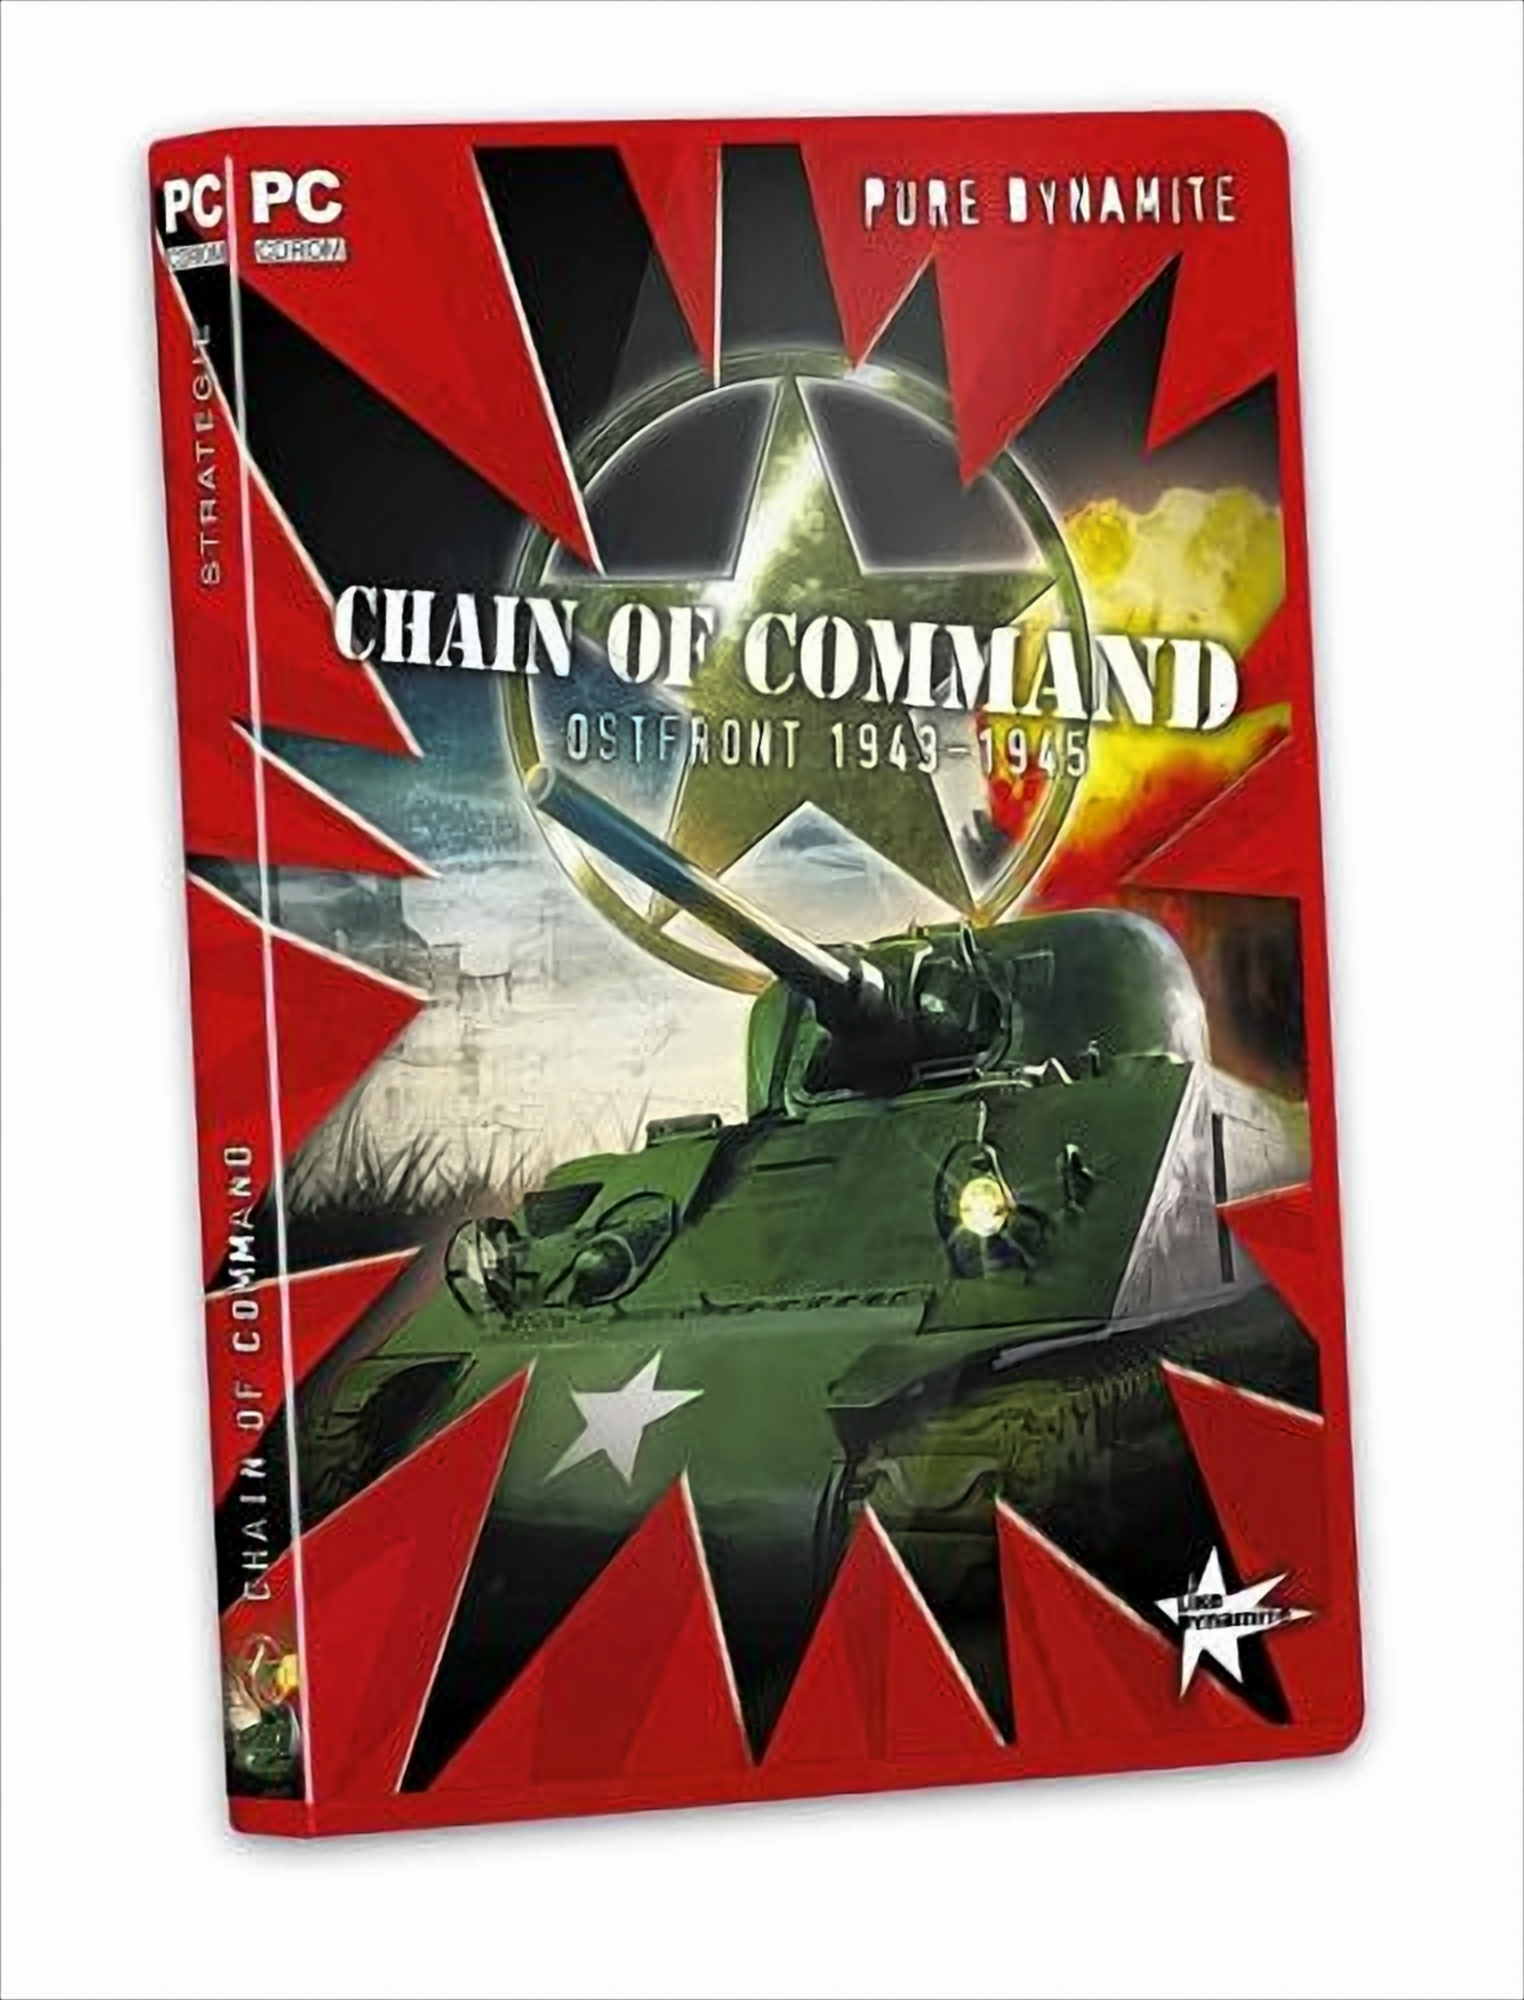 Chain of Command: Ostfront 1943-1945 Dynamite] [PC] - [Pure